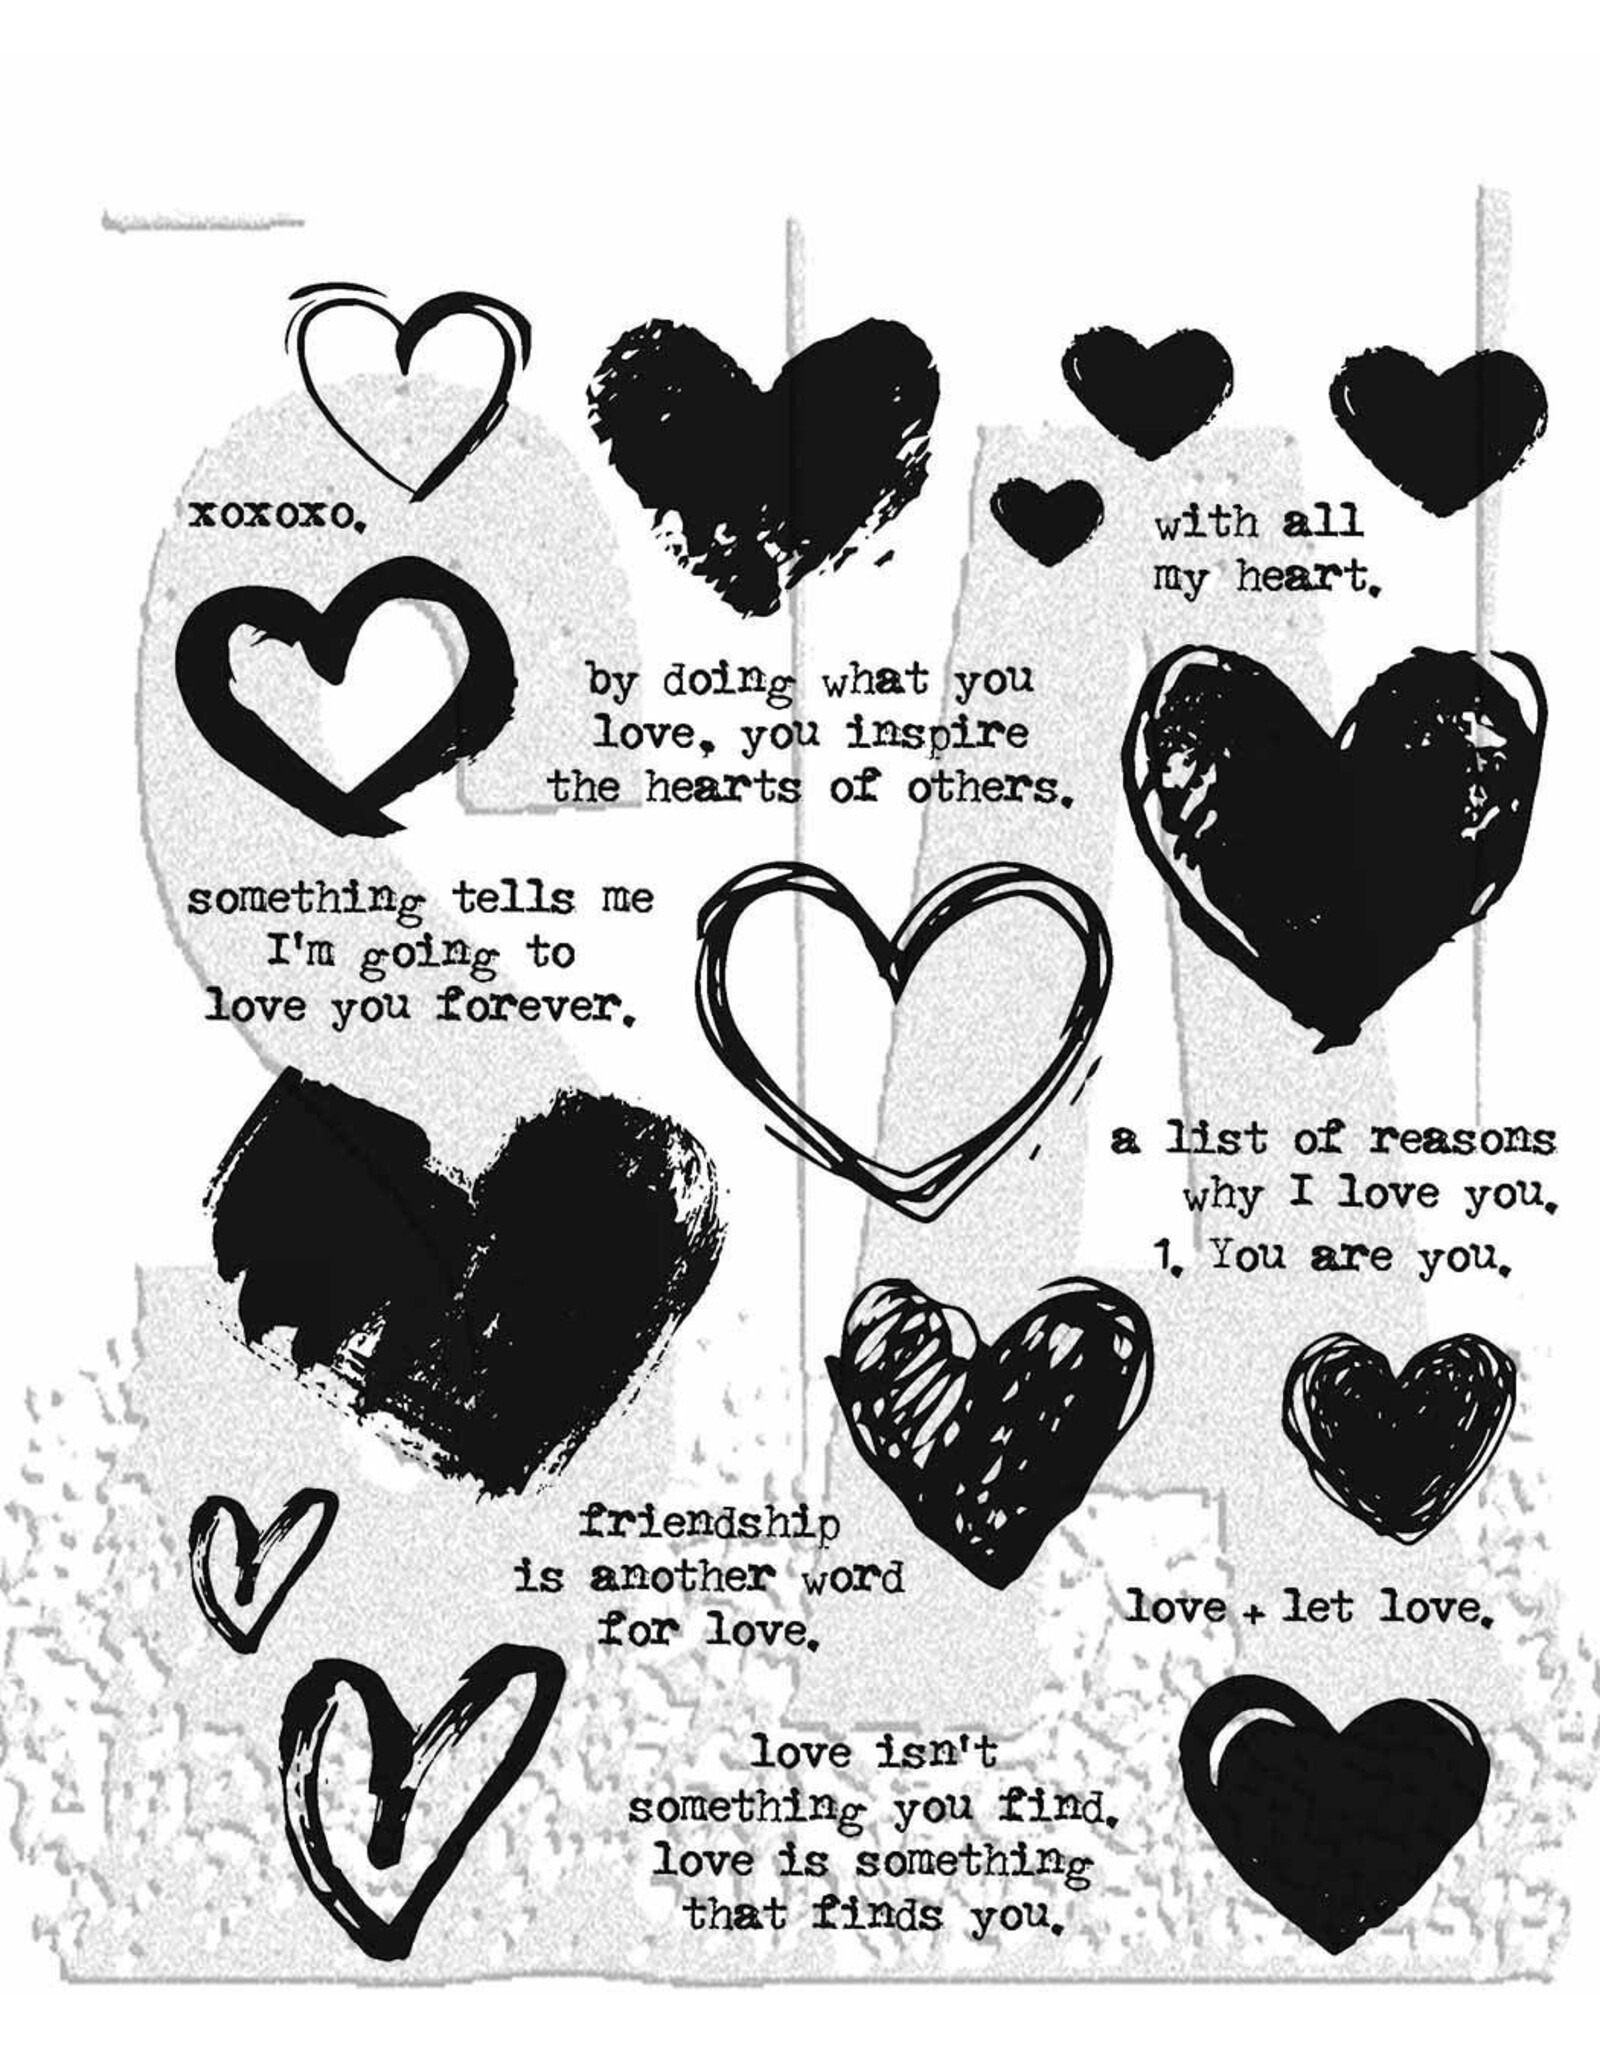 STAMPERS ANONYMOUS STAMPERS ANONYMOUS TIM HOLTZ LOVE NOTES 7x8.5 CLING STAMP SET